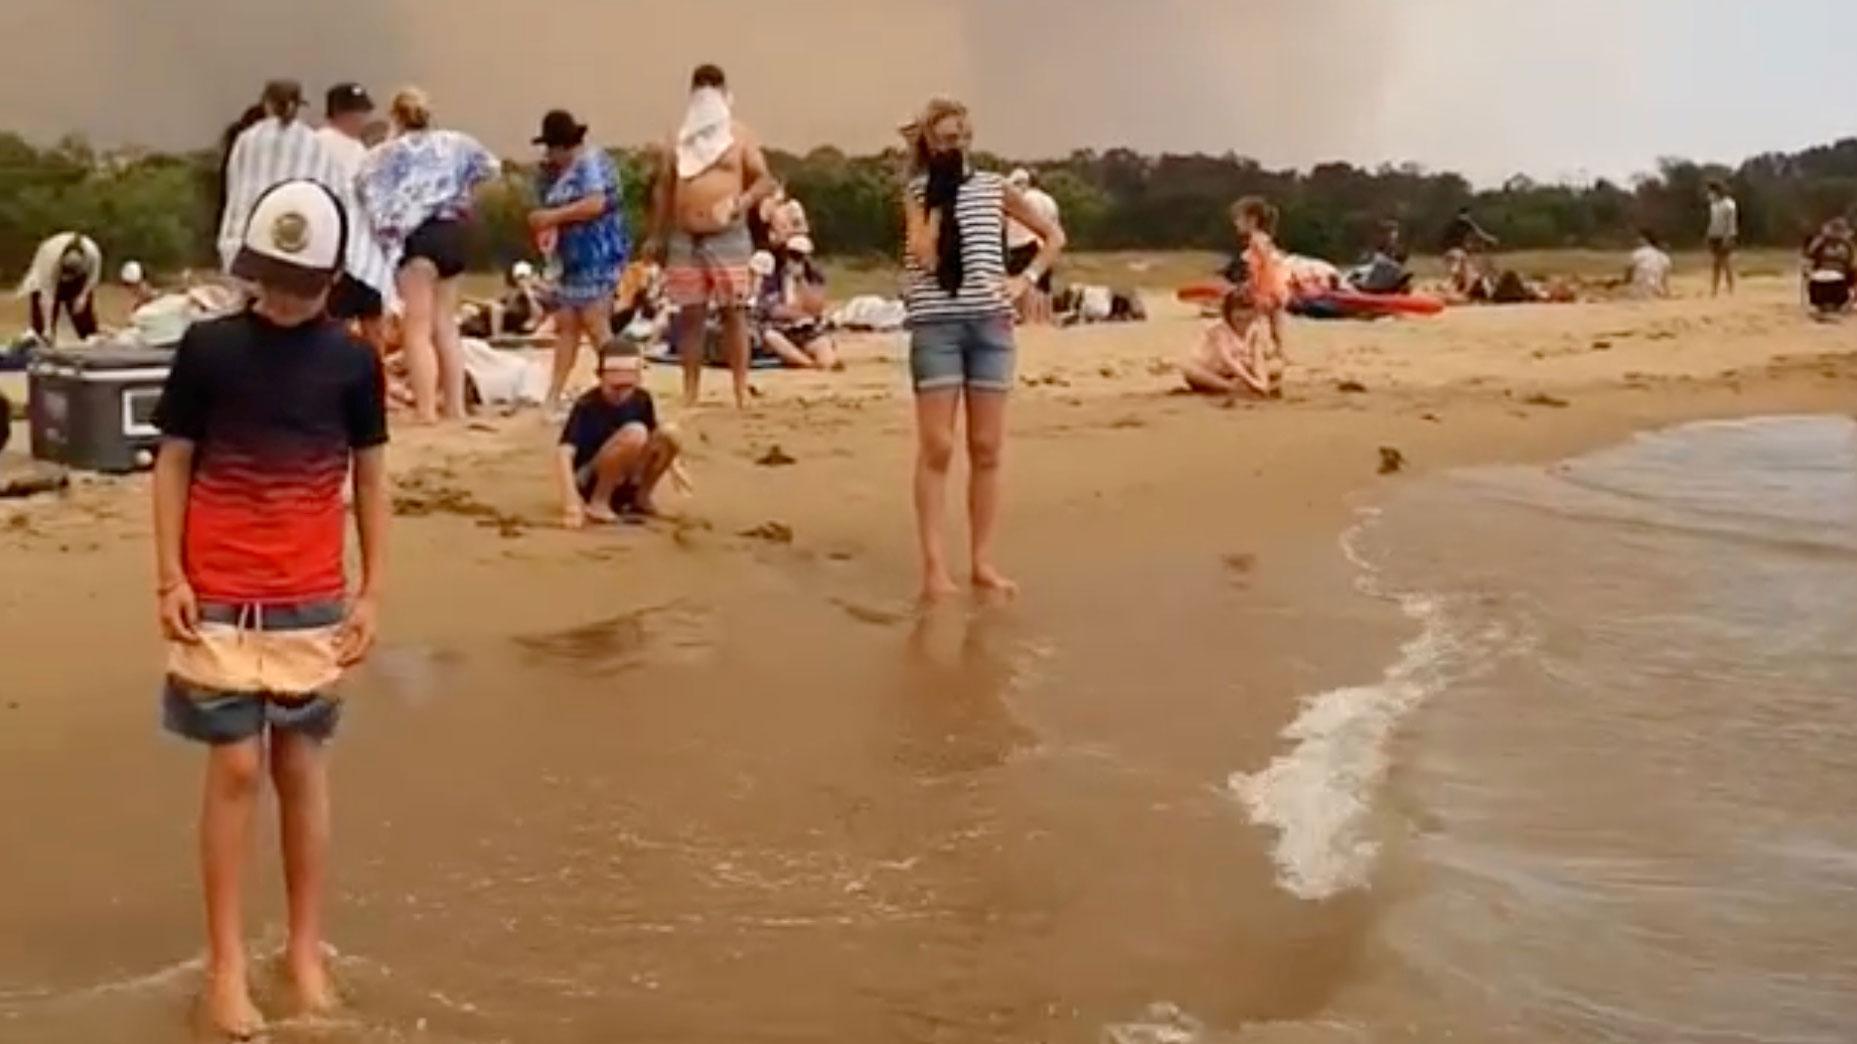 Several people are shown standing on a beach with many holding cloth to their faces to protect from the smoke.